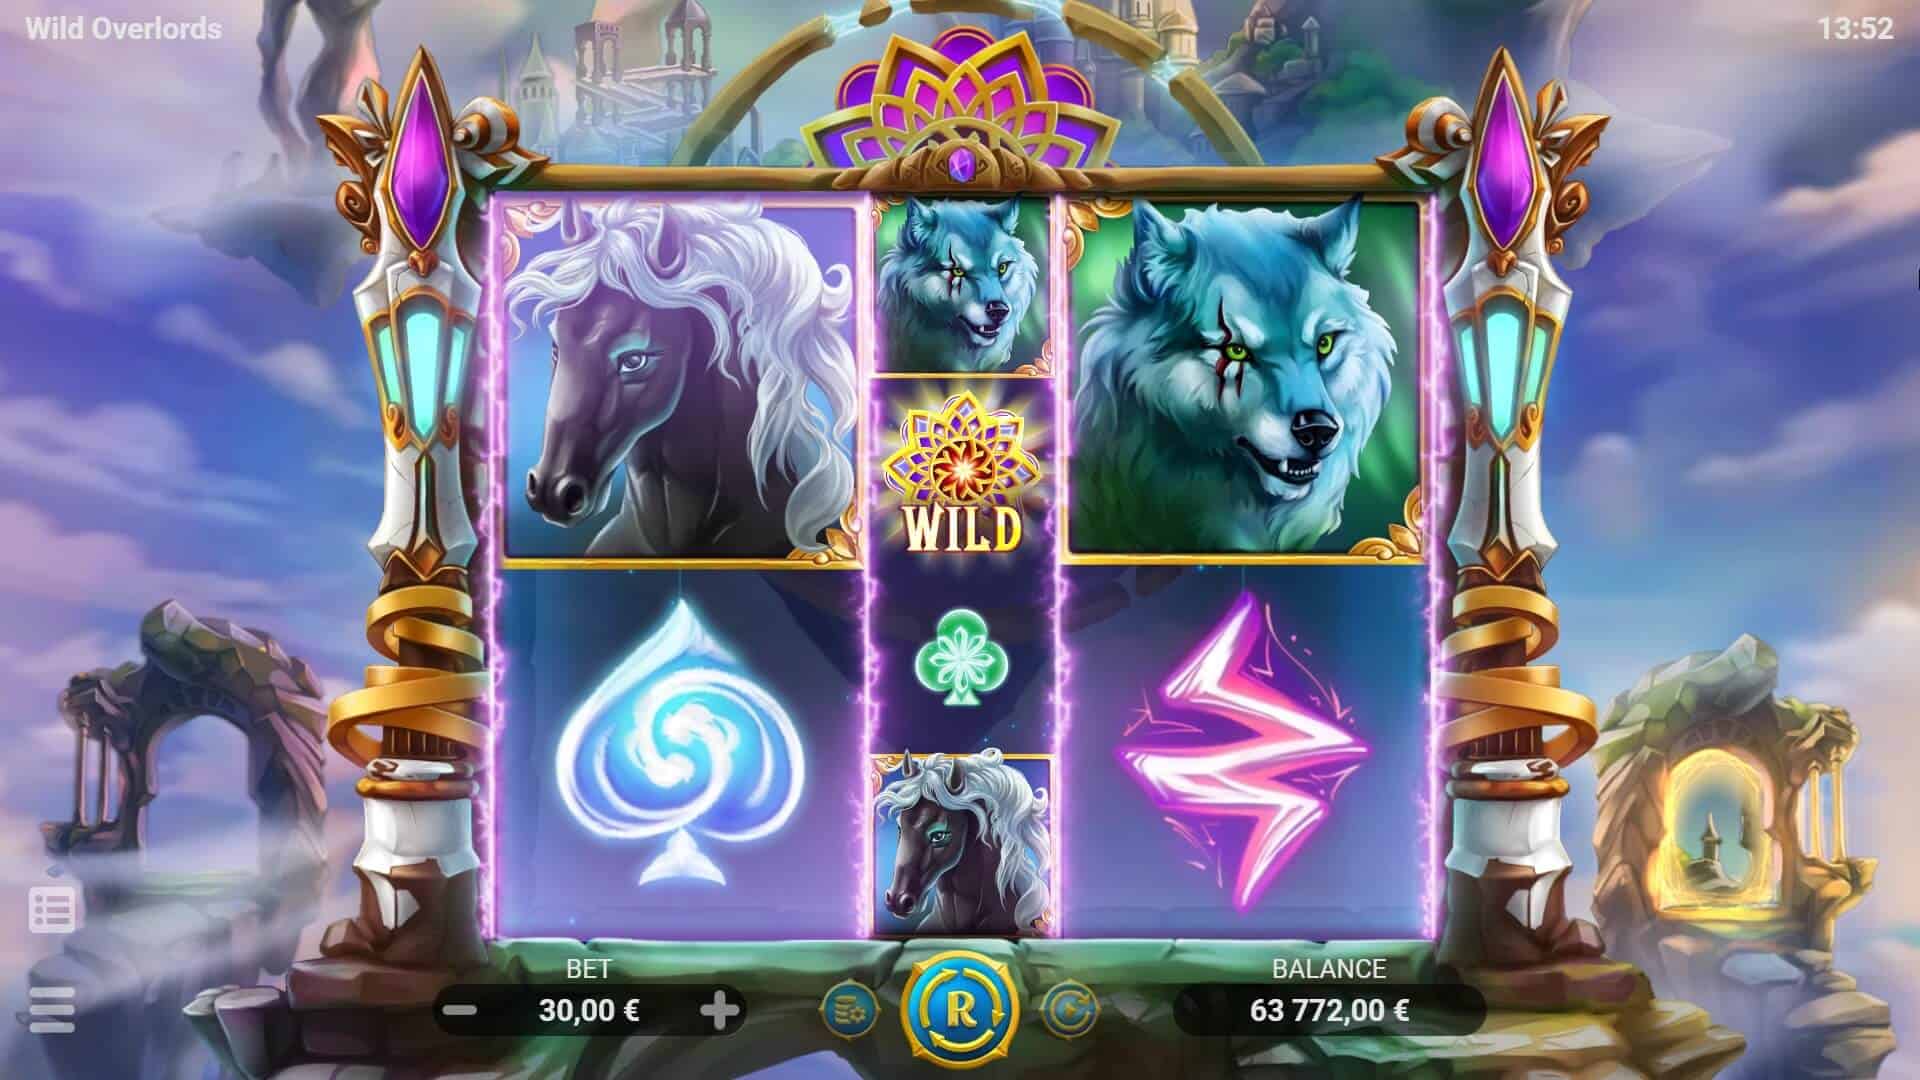 Wild Overlords Evoplay Slot1234 PG